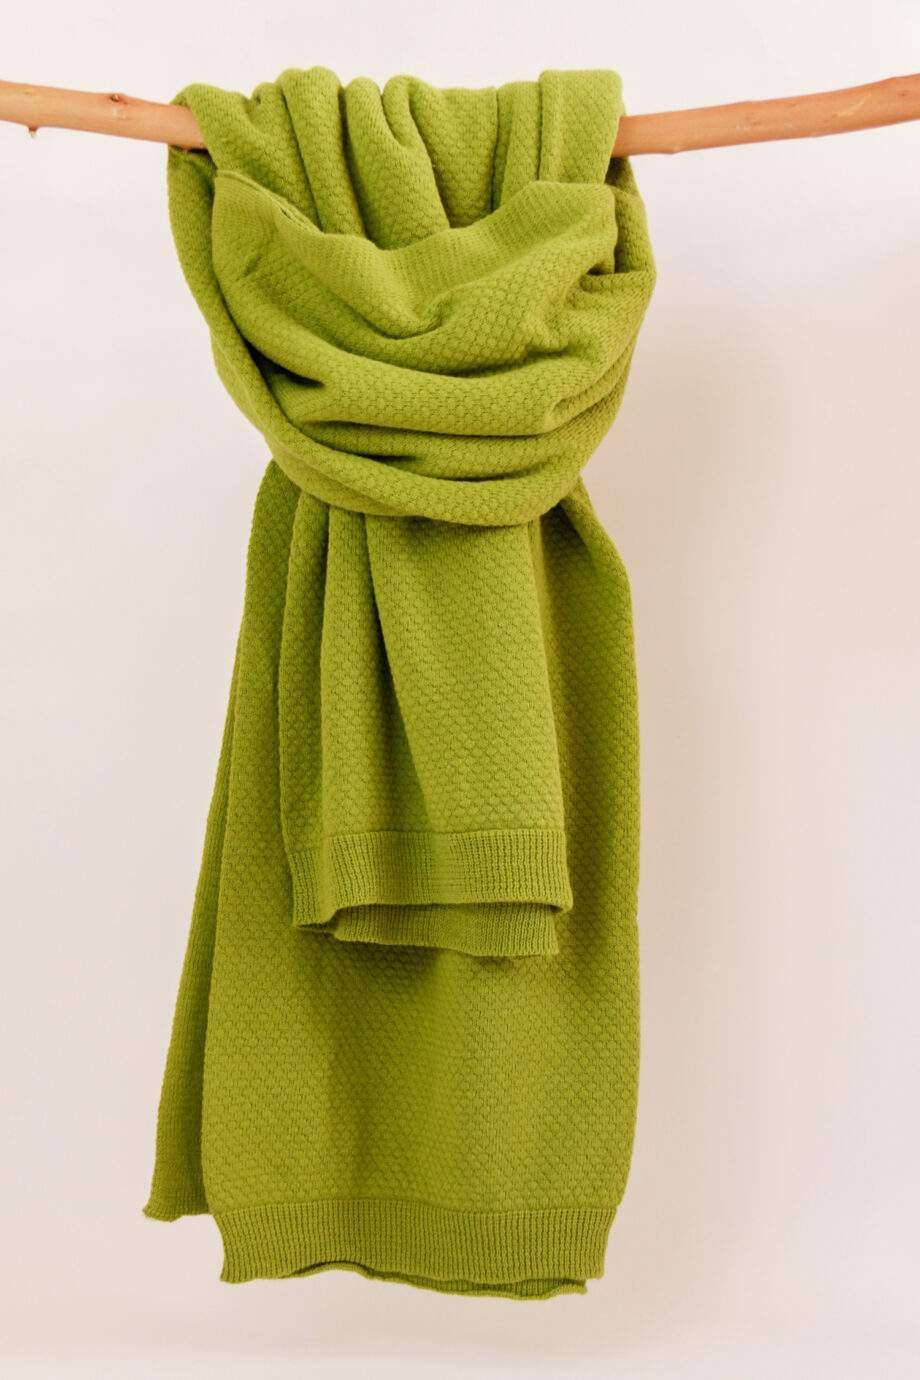 liz apple green knitted cotton throw large